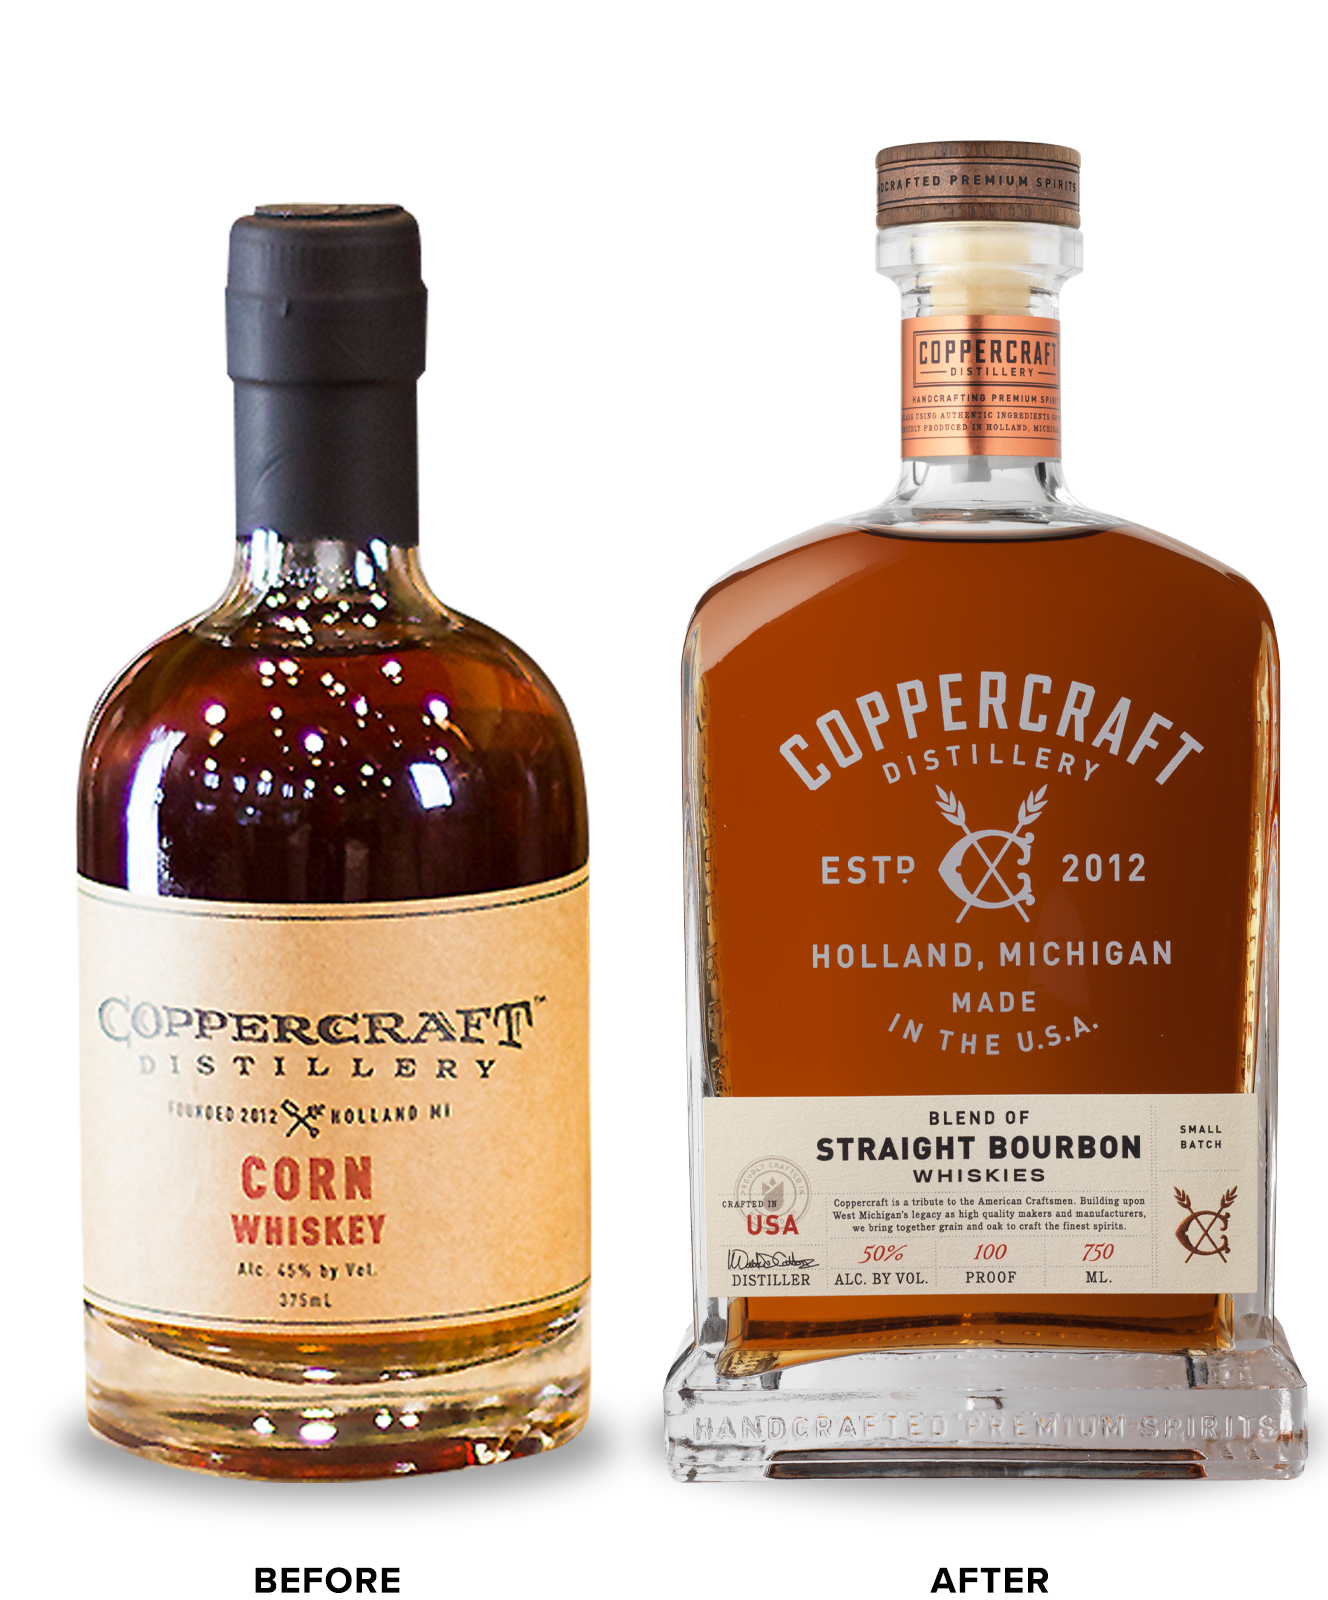 Coppercraft Distillery Bourbon Packaging Before Redesign on Left & After on Right